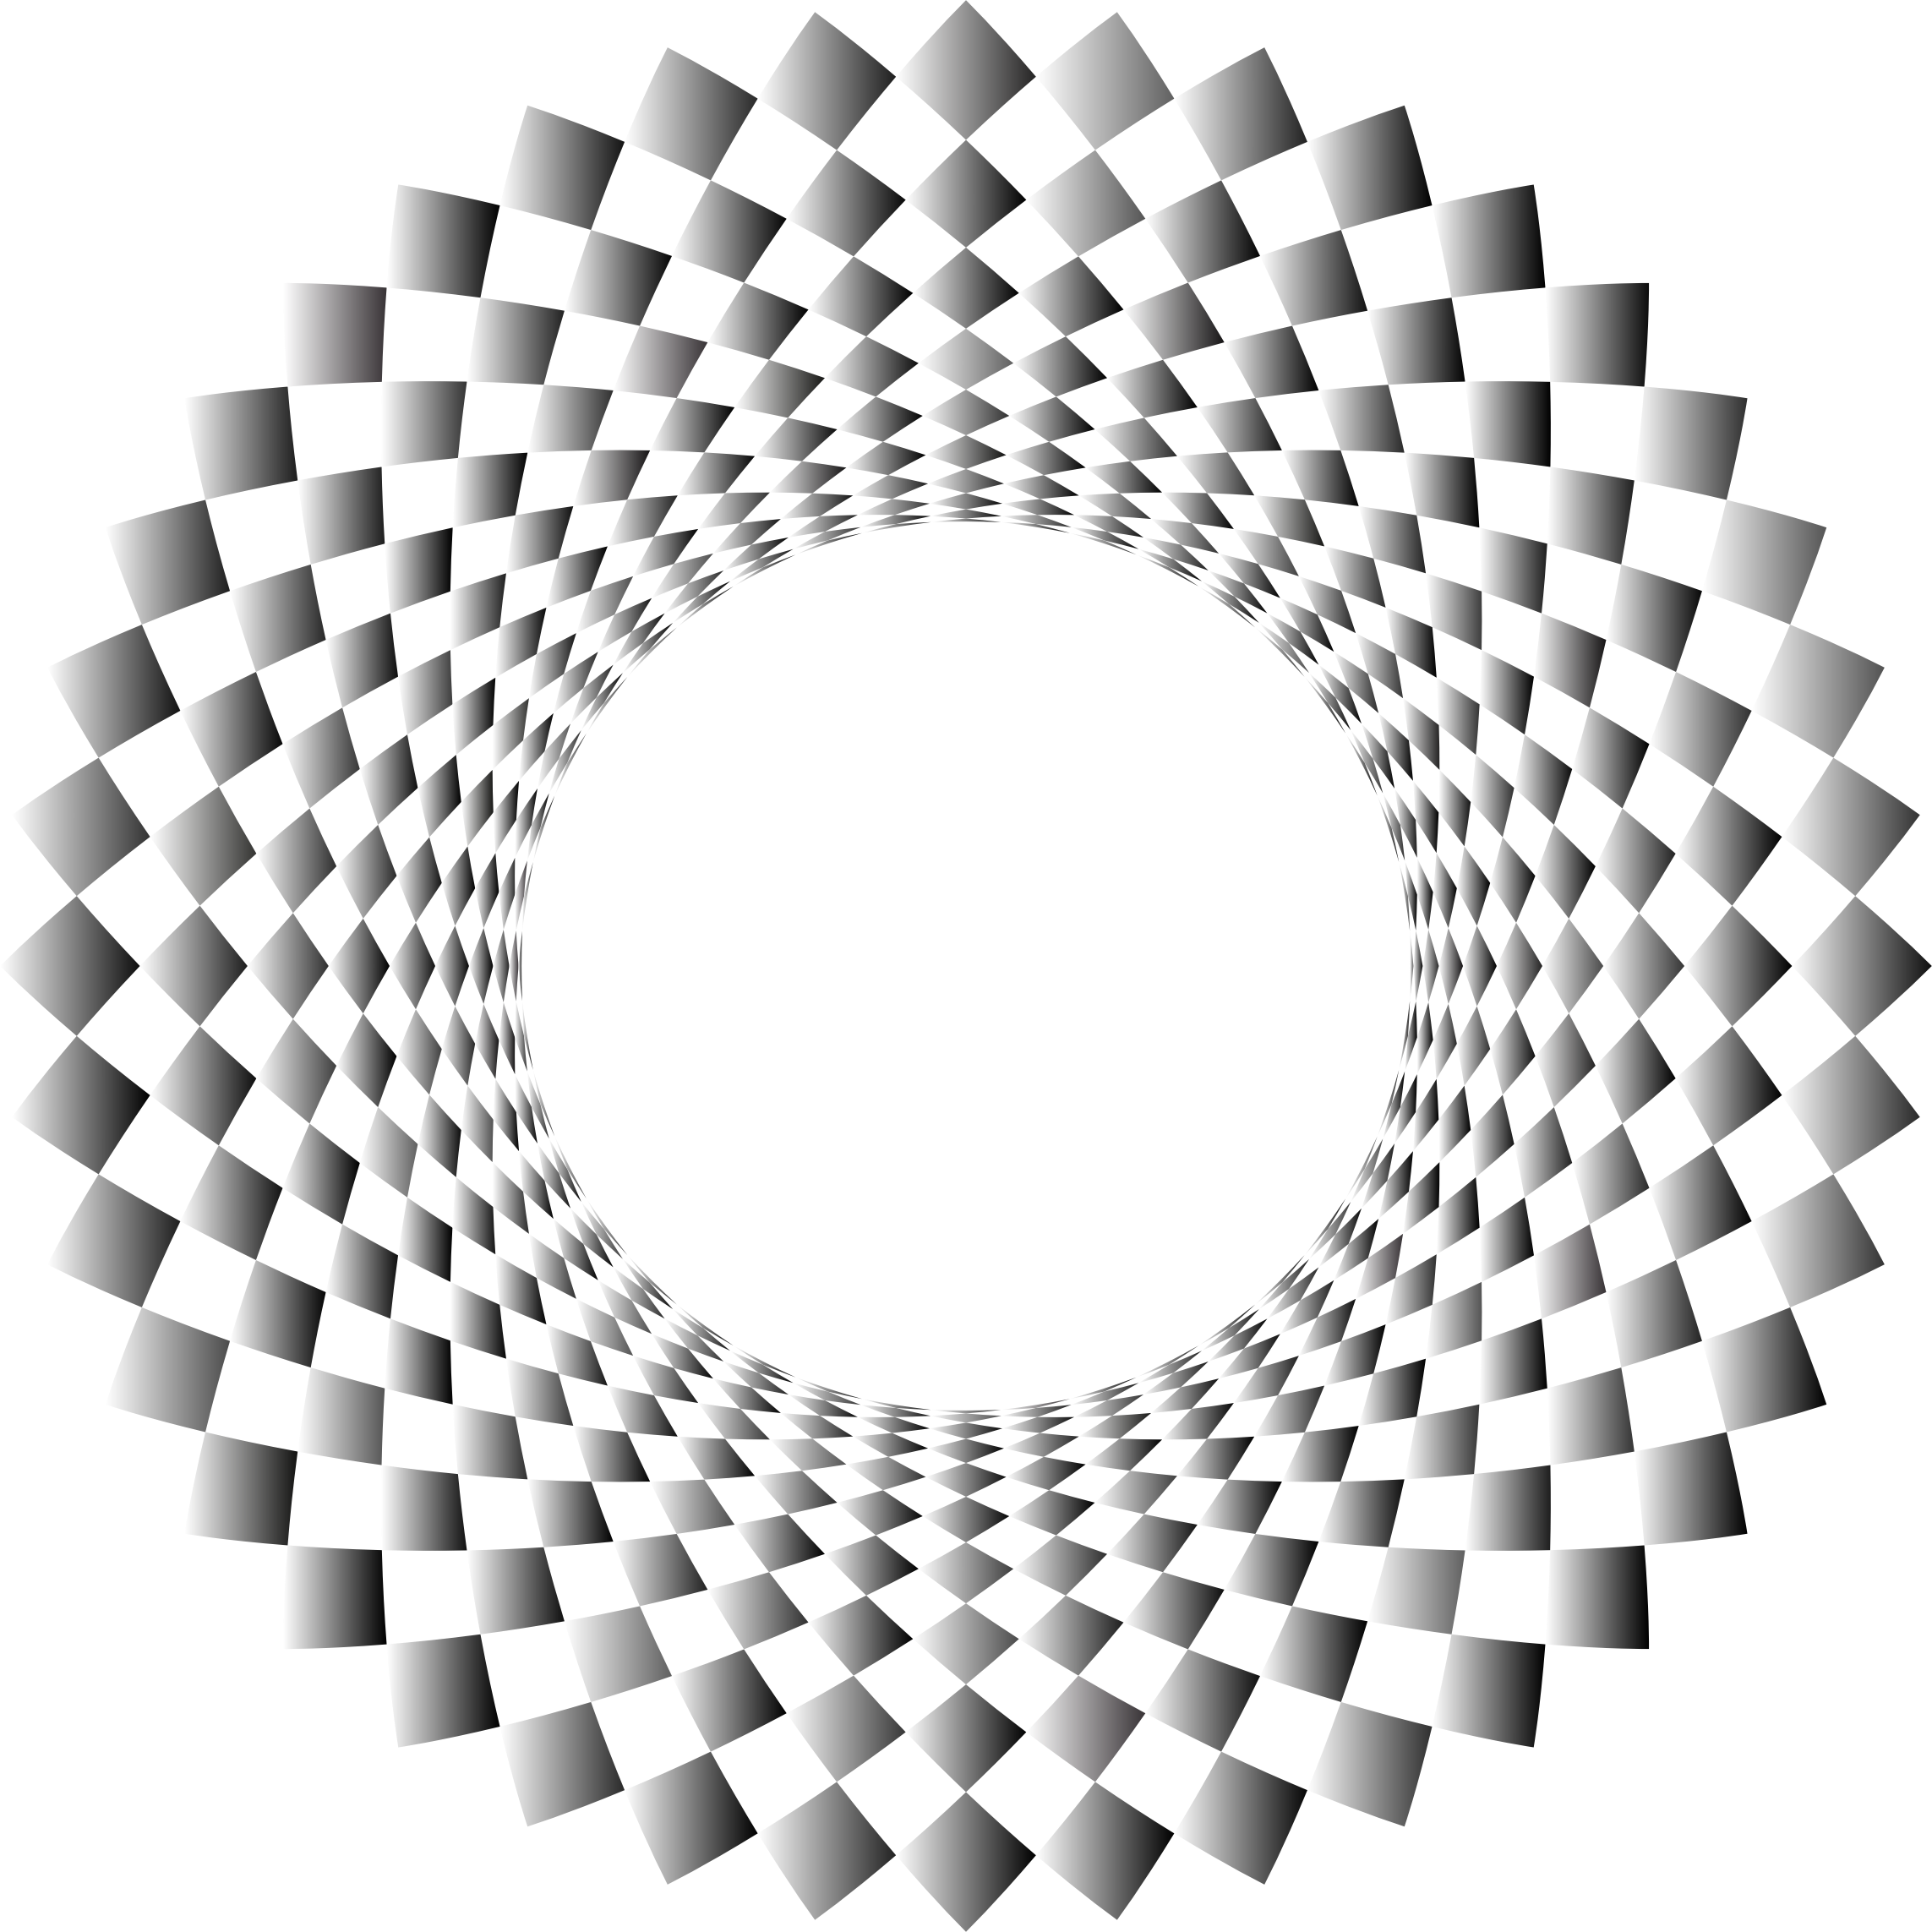 Checkered Frame 2 3 No Background - Dotted Concentric Circleds (2286x2286)